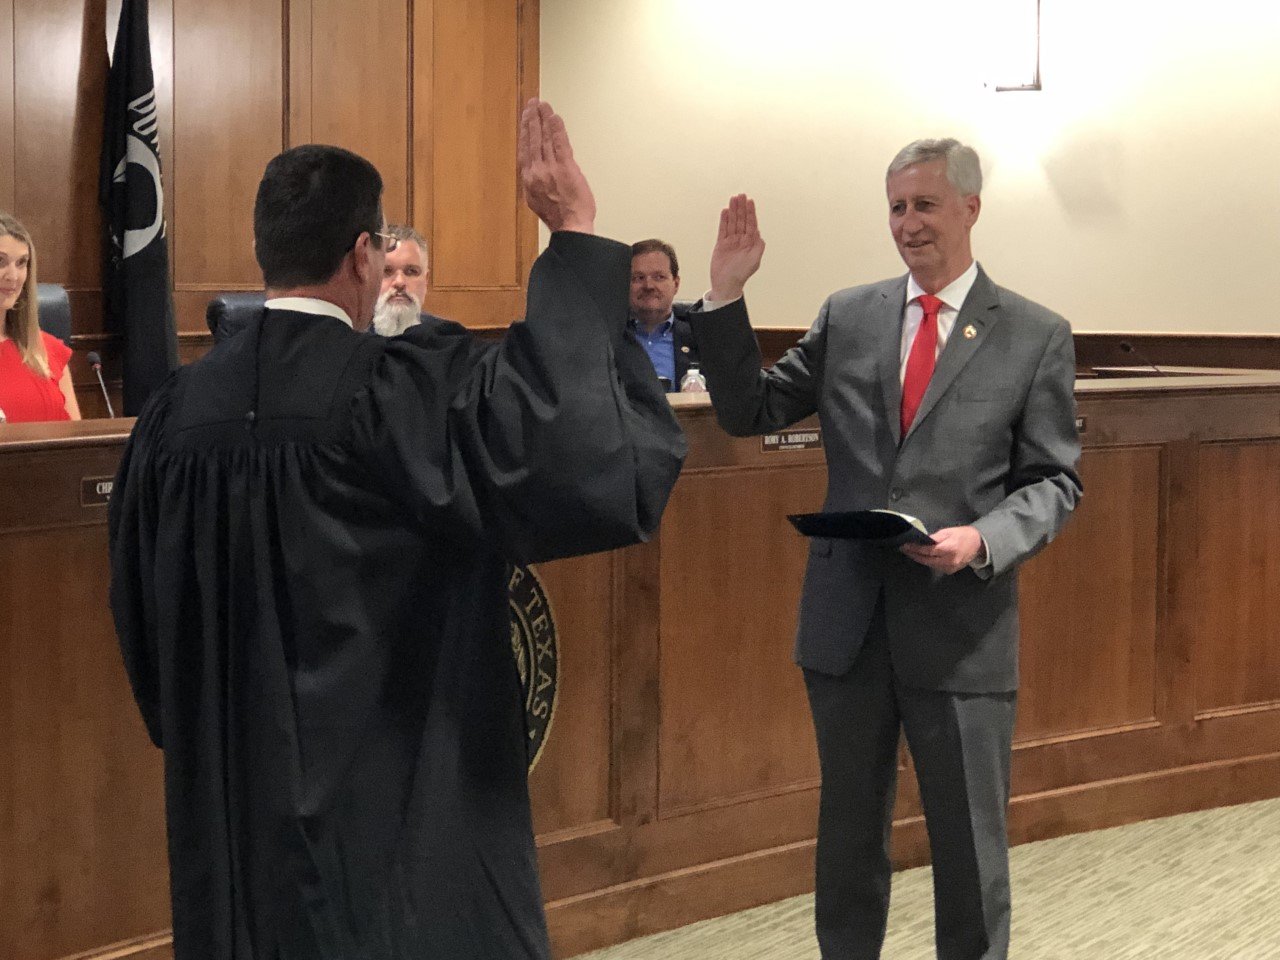 William "Dusty" Thiele takes the mayoral oath of office Friday at City Hall from Municipal Judge Jeffrey C. Brashear. Ward B Council Members Gina Hicks, Rory Robertson, and City Administrator Byron Hebert can be seen in the background.